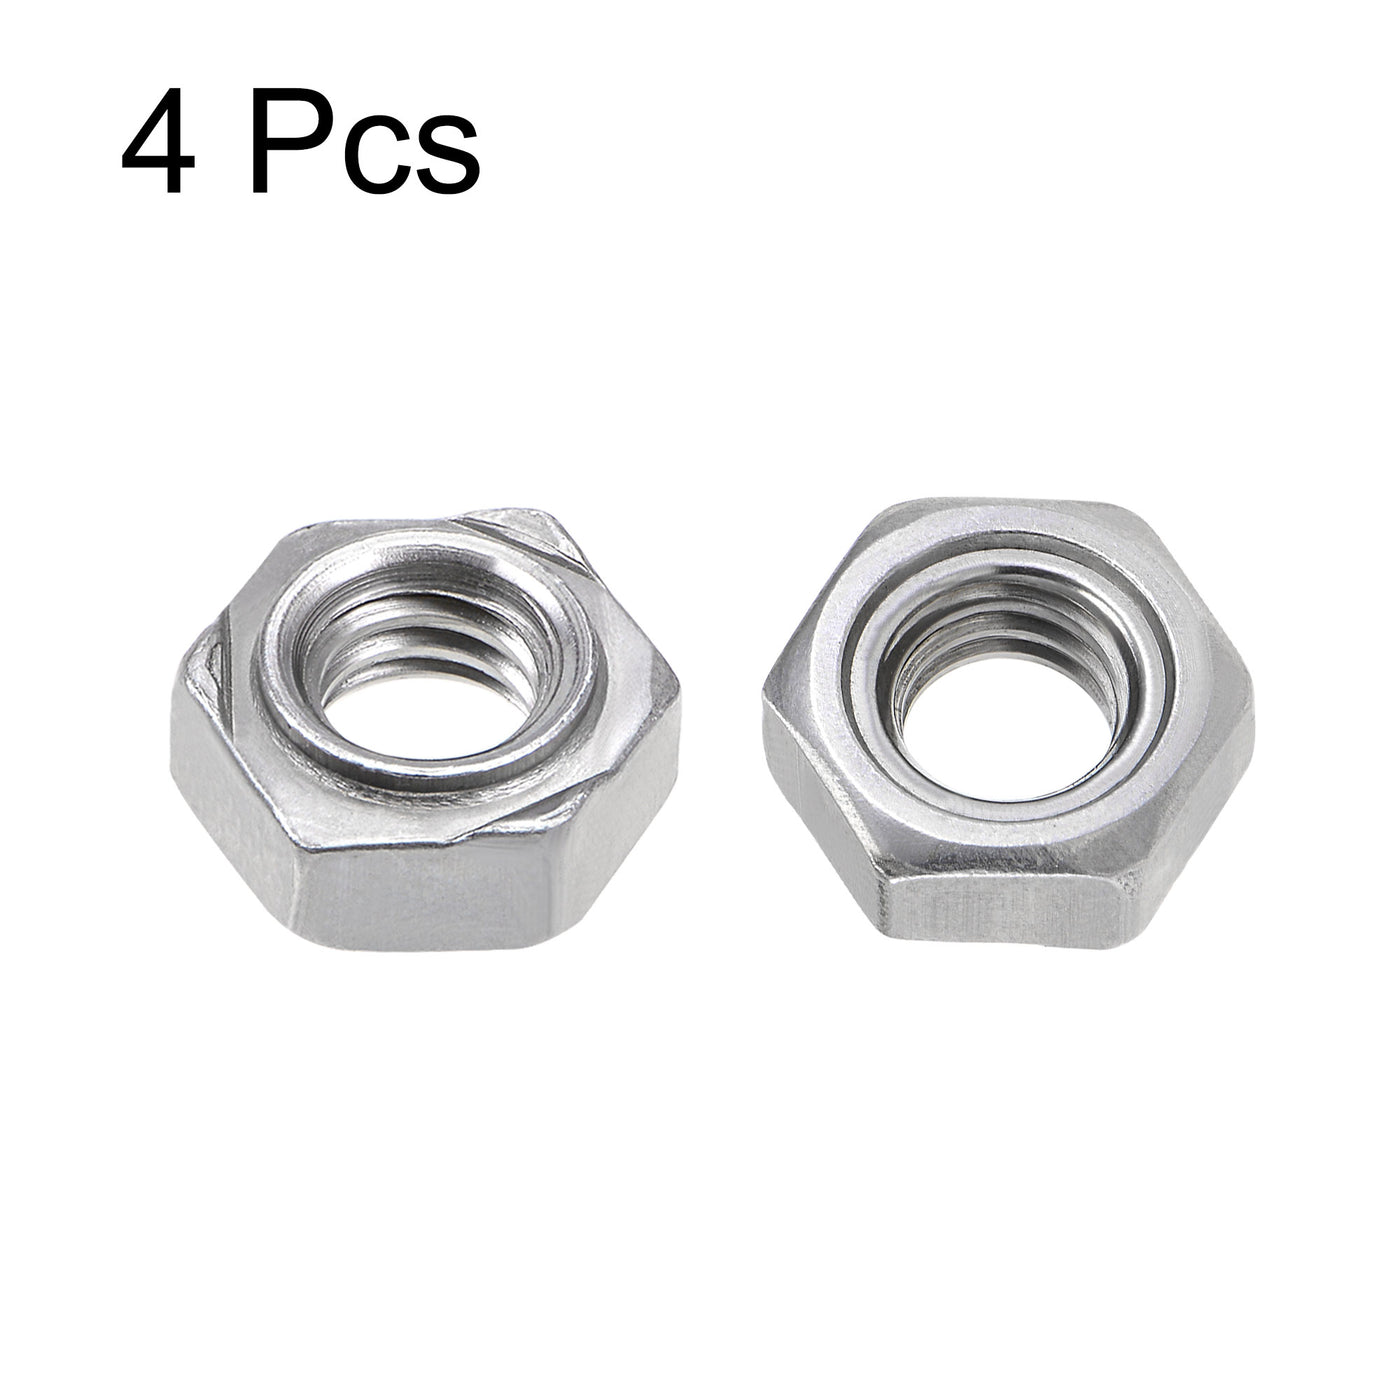 Uxcell Uxcell Hex Weld Nuts,1/2-13 Carbon Steel with 3 Projections Machine Screw Gray 4pcs